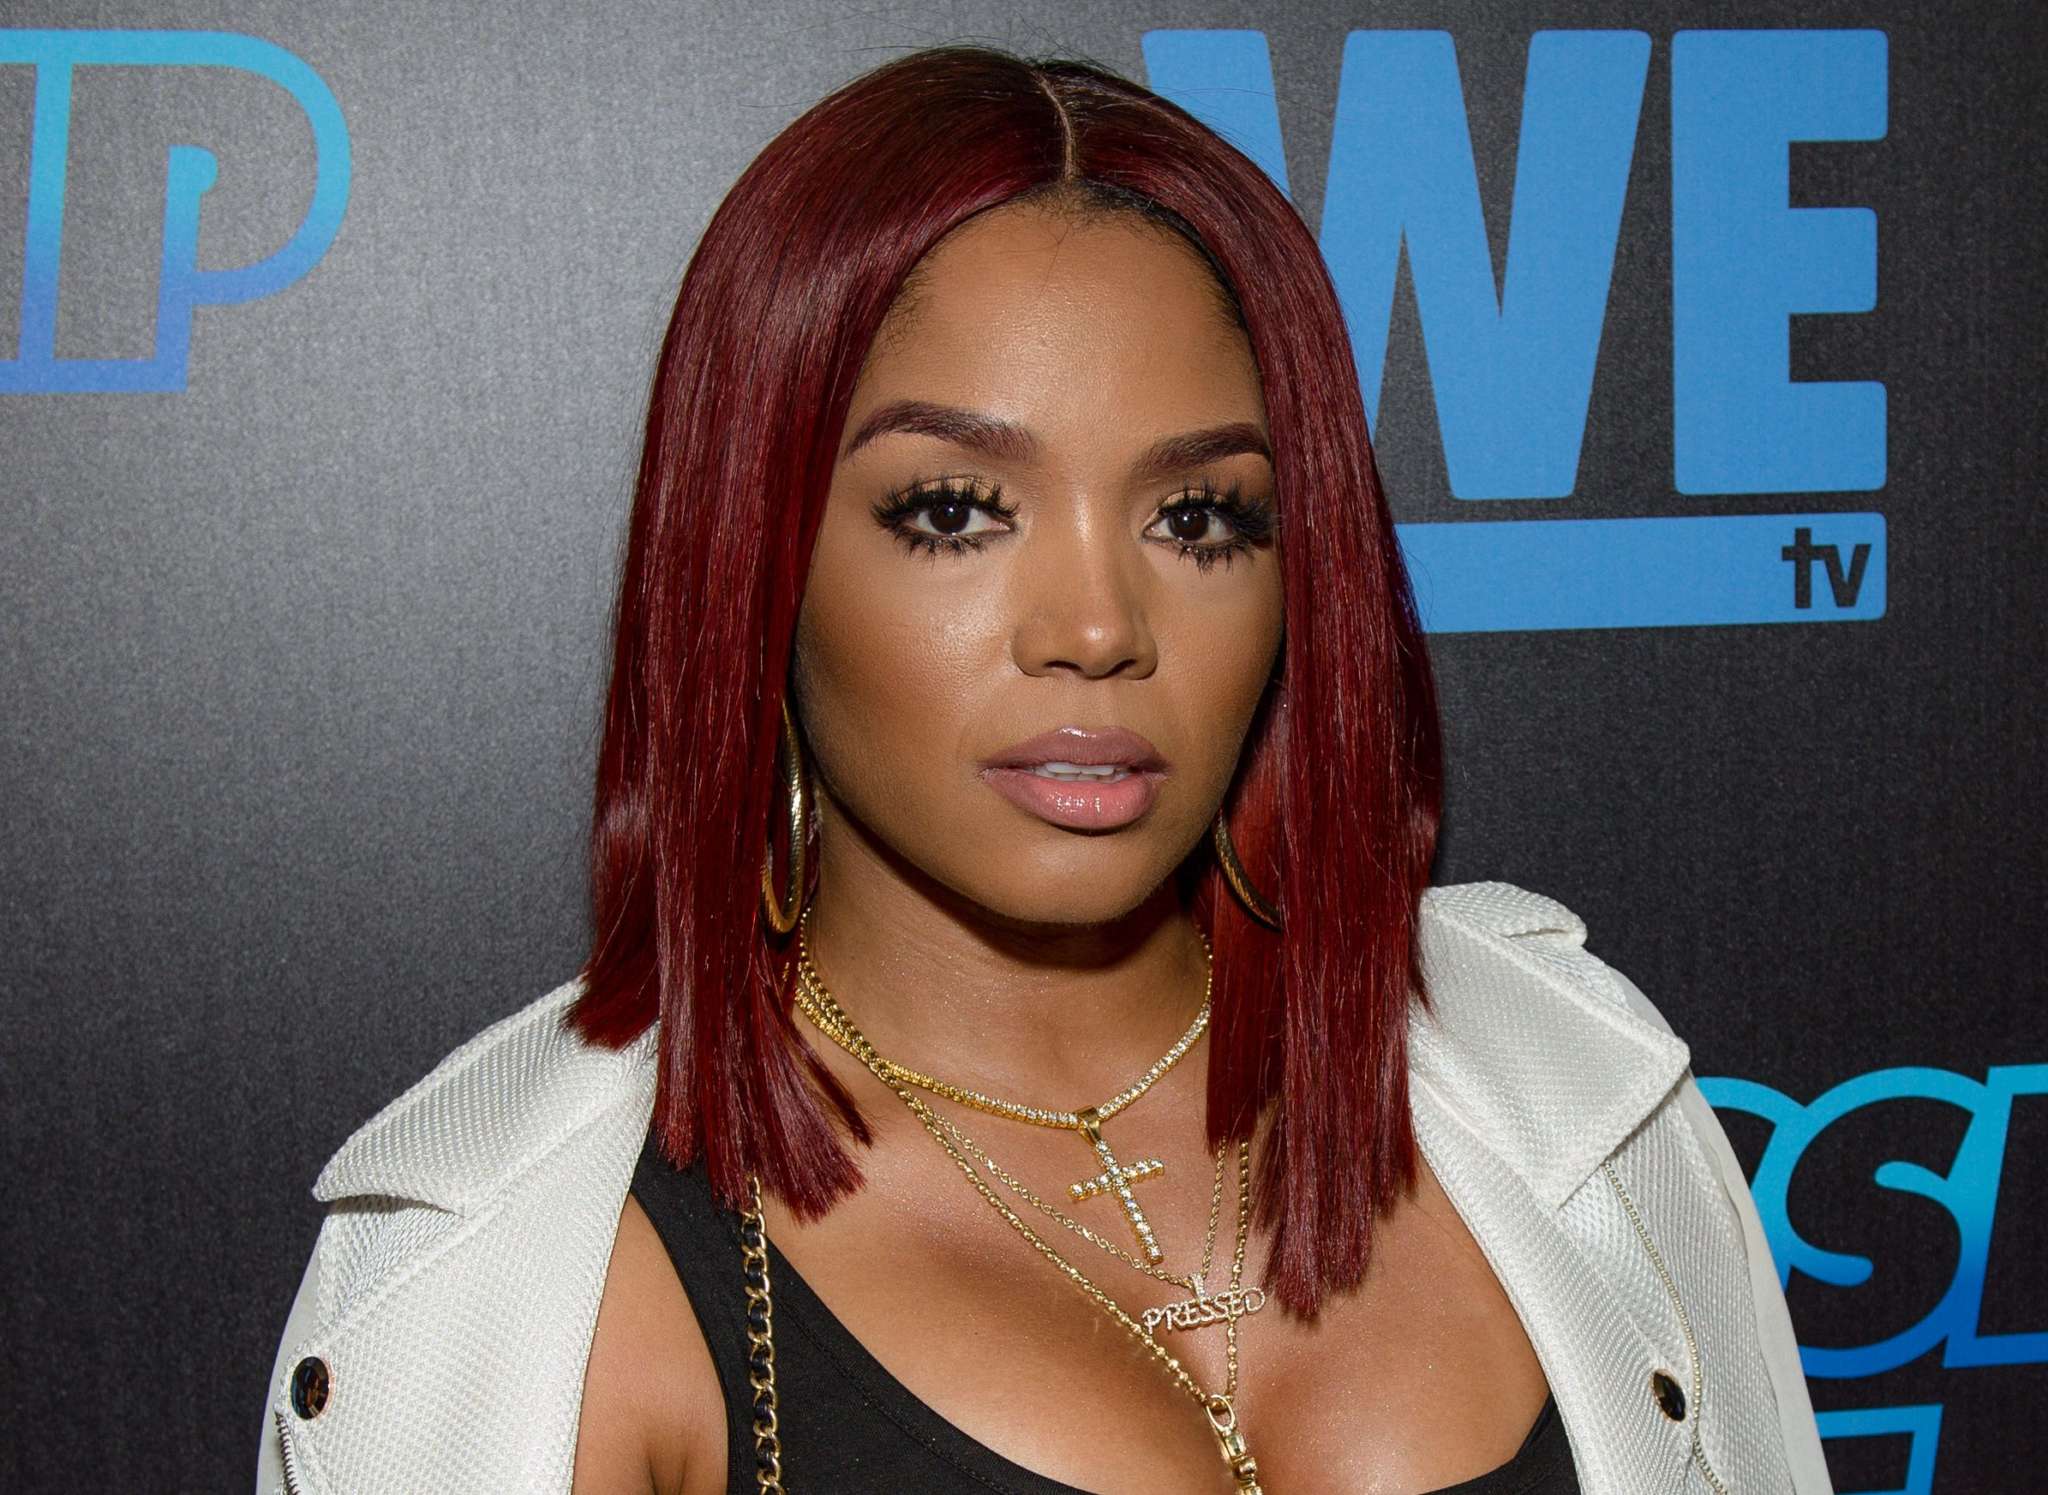 Rasheeda Frost's Fans Can Meet At The 'Brunch 'With A Boss' Event Next Month